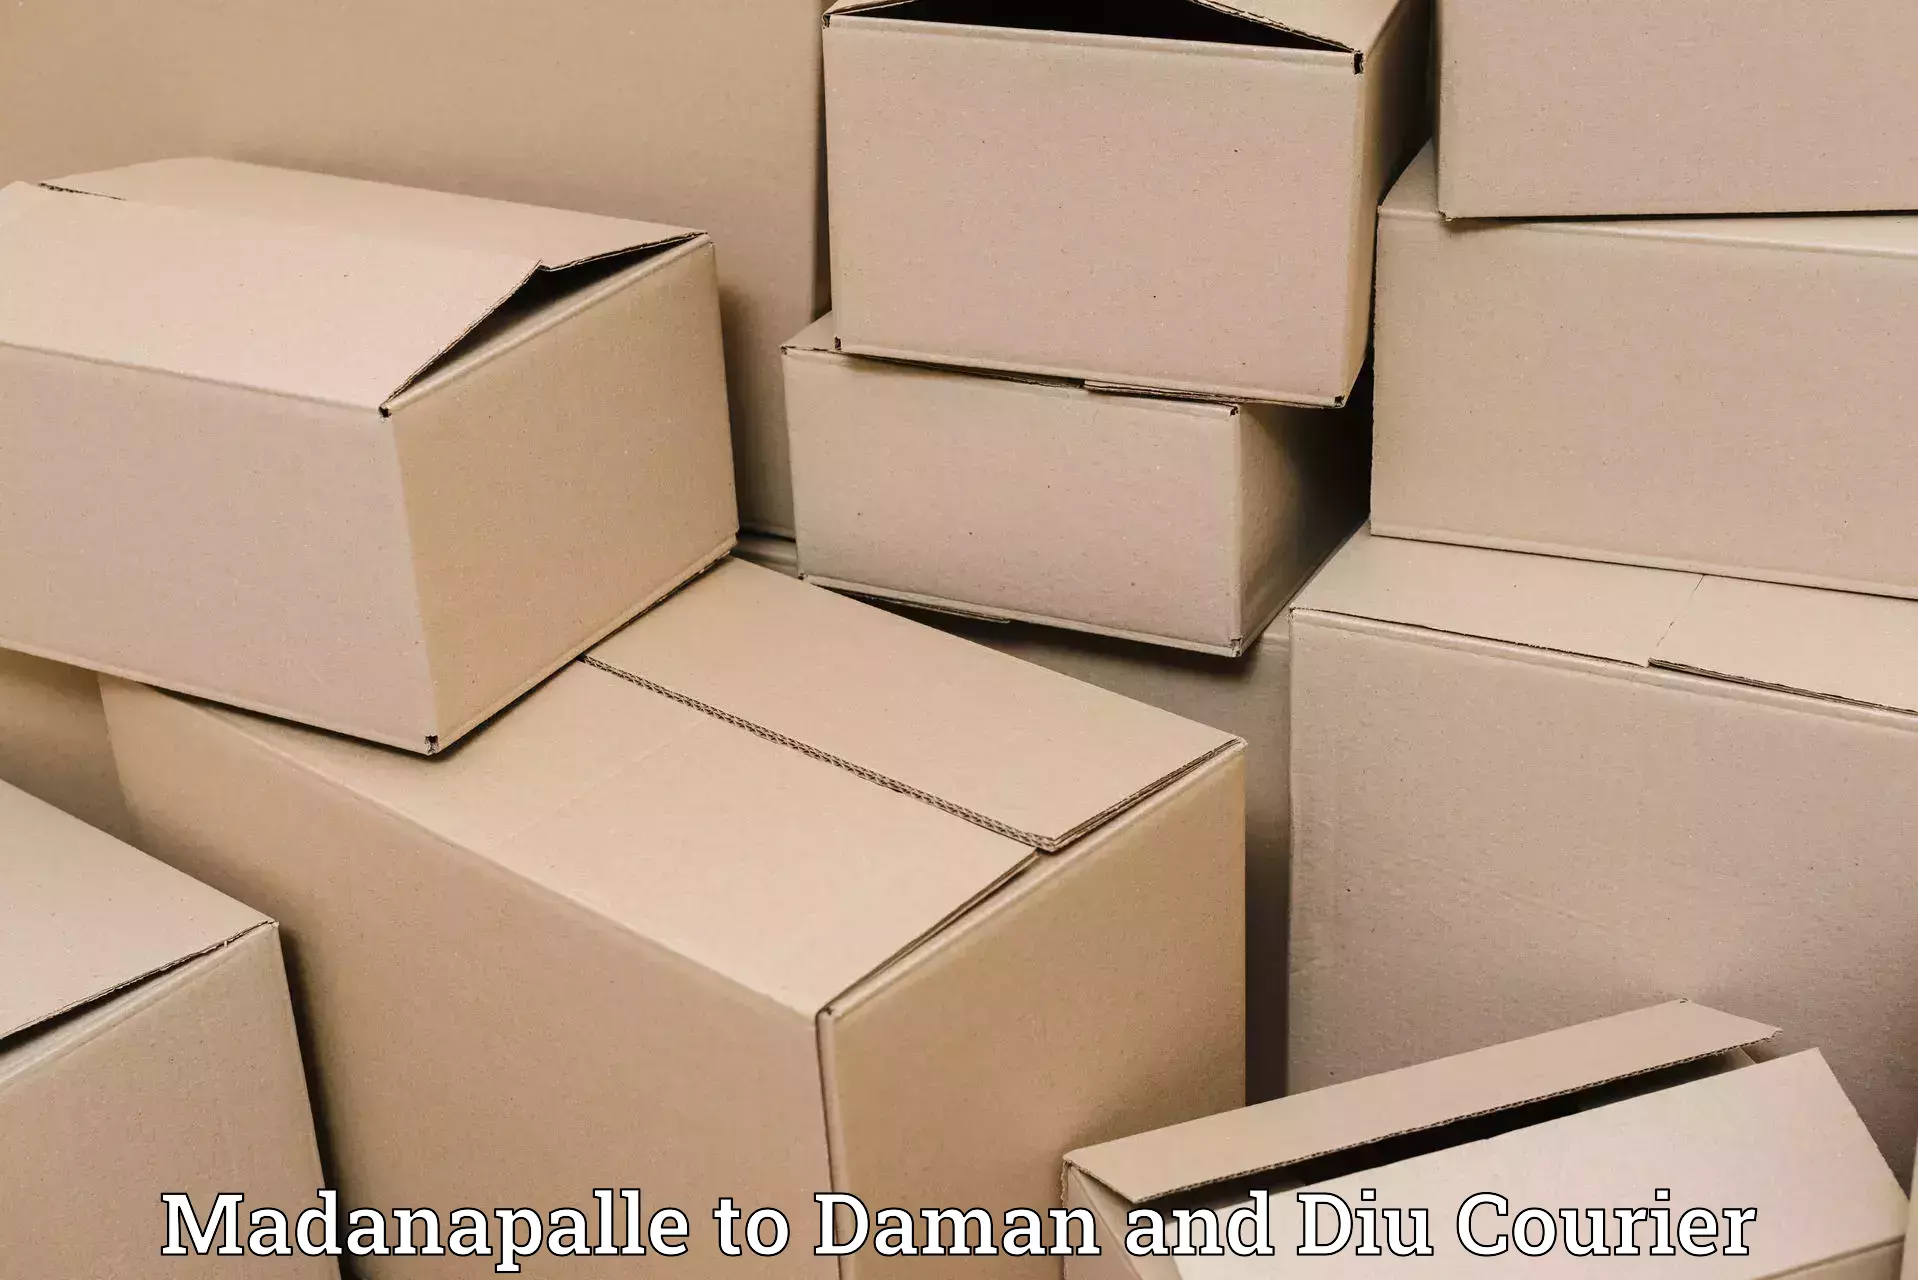 Online package tracking Madanapalle to Daman and Diu